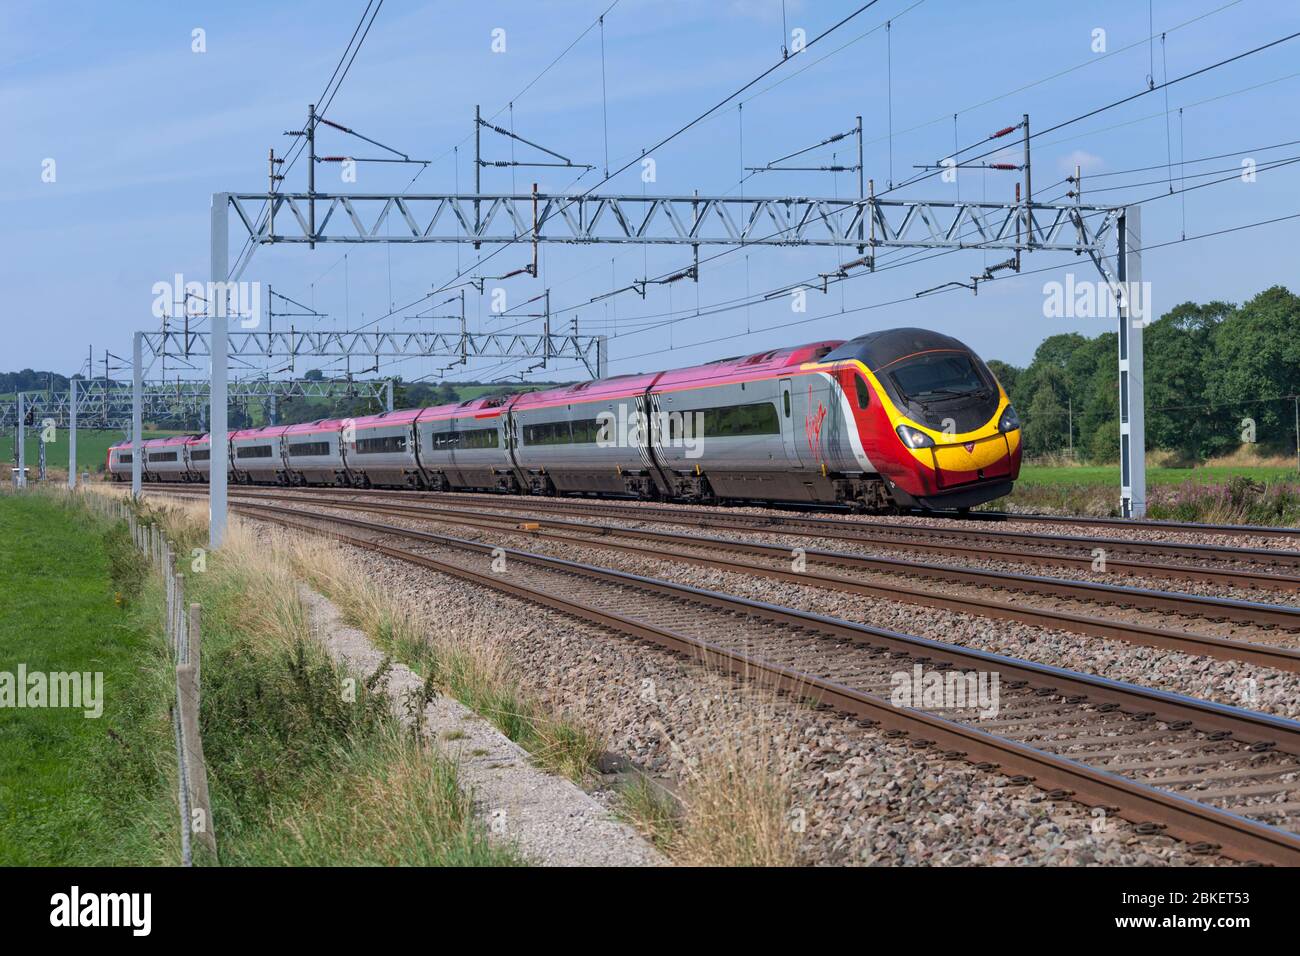 Virgin trains class 390 Alstom Pendolino 390049 passing Stableford, Staffordshire on the 4 track west coast mainline Stock Photo